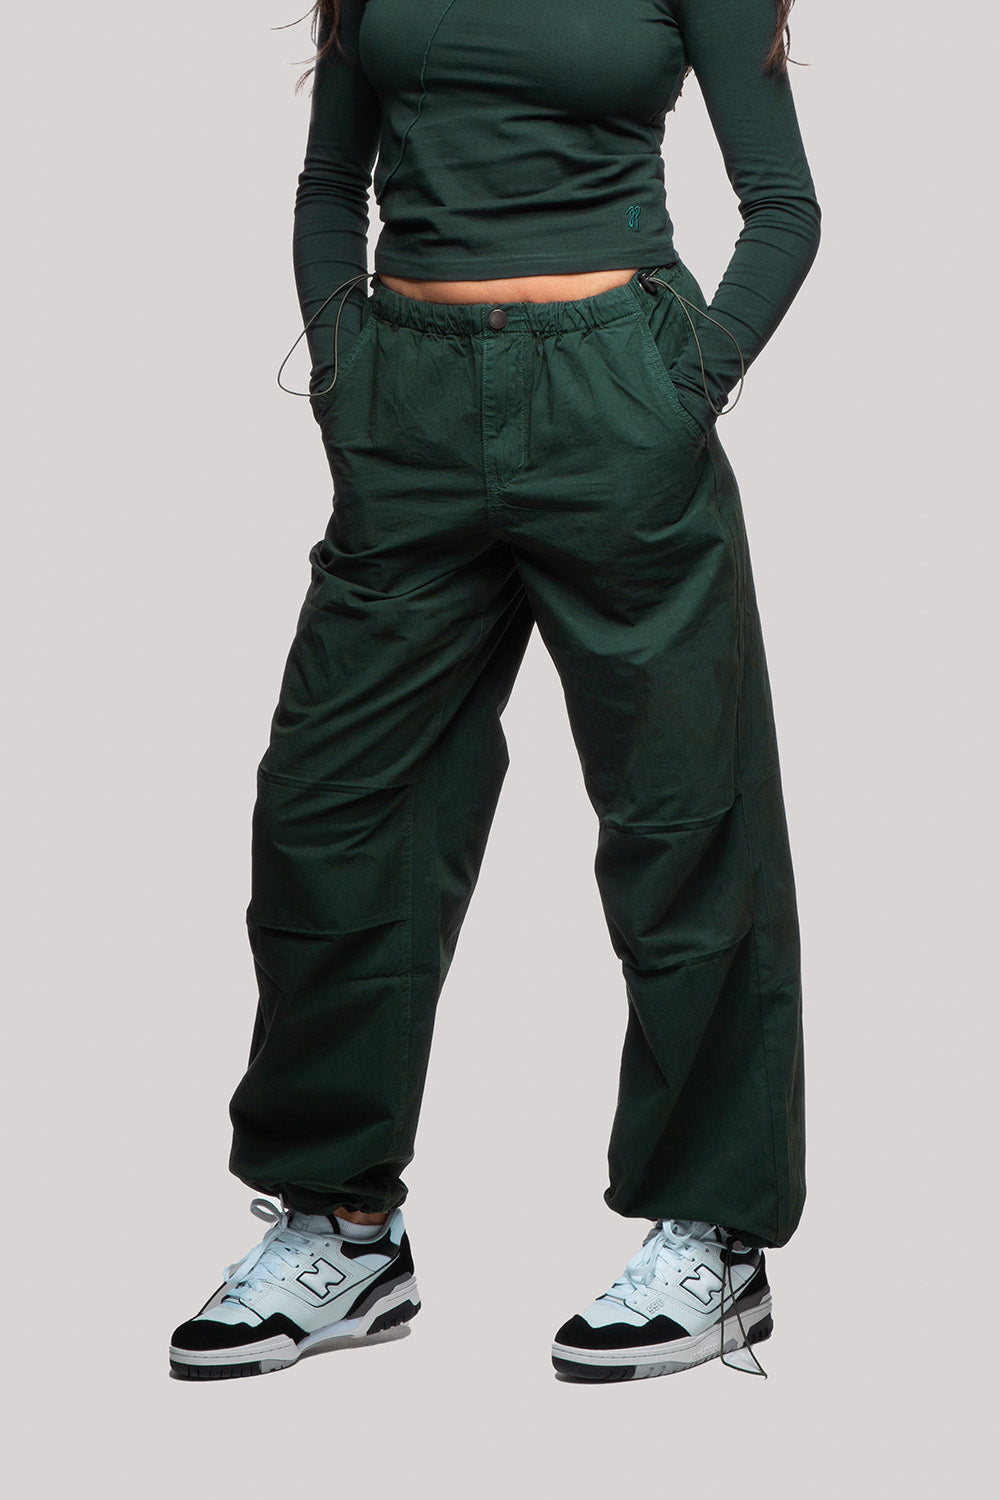  Xineicy Parachute Pants for Women Drawstring Baggy